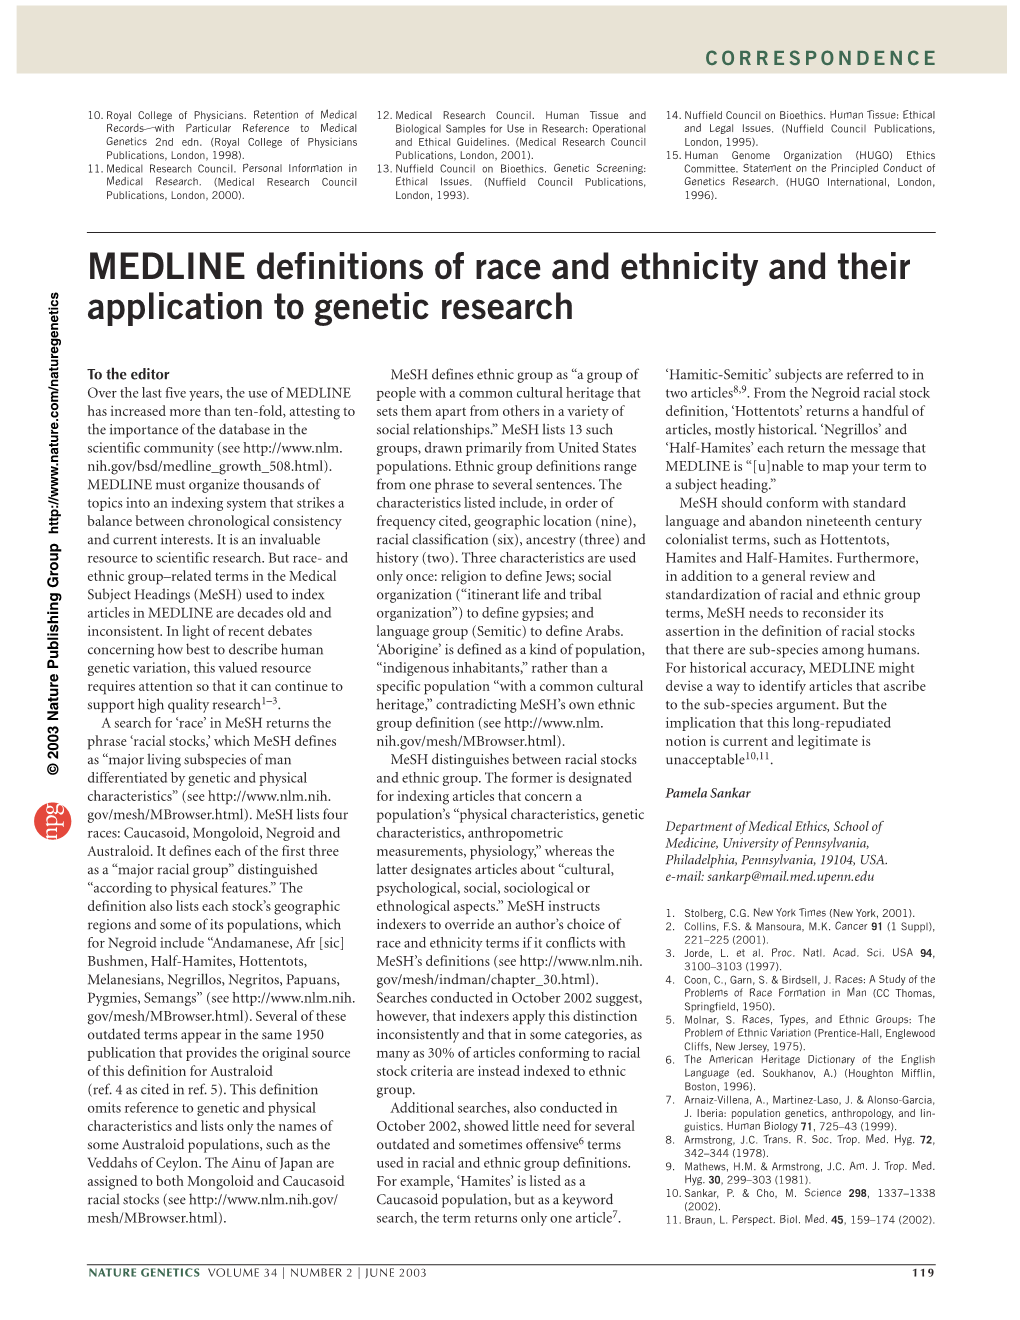 MEDLINE Definitions of Race and Ethnicity and Their Application to Genetic Research